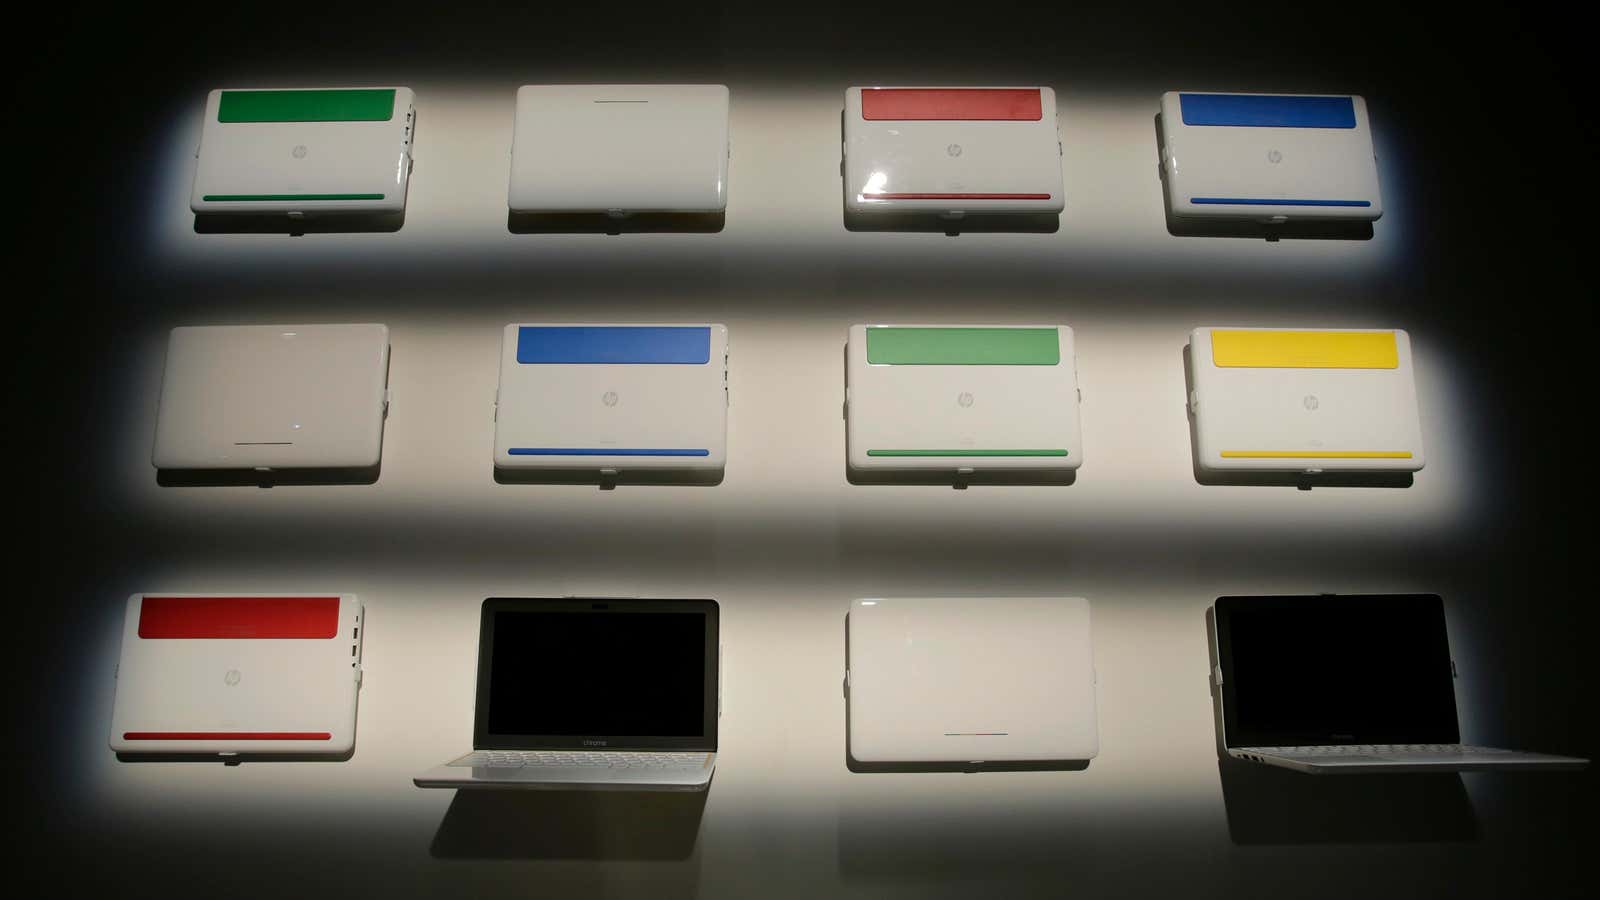 Google’s experiments in hardware are promising, but the company’s main business model isn’t showing signs of changing.